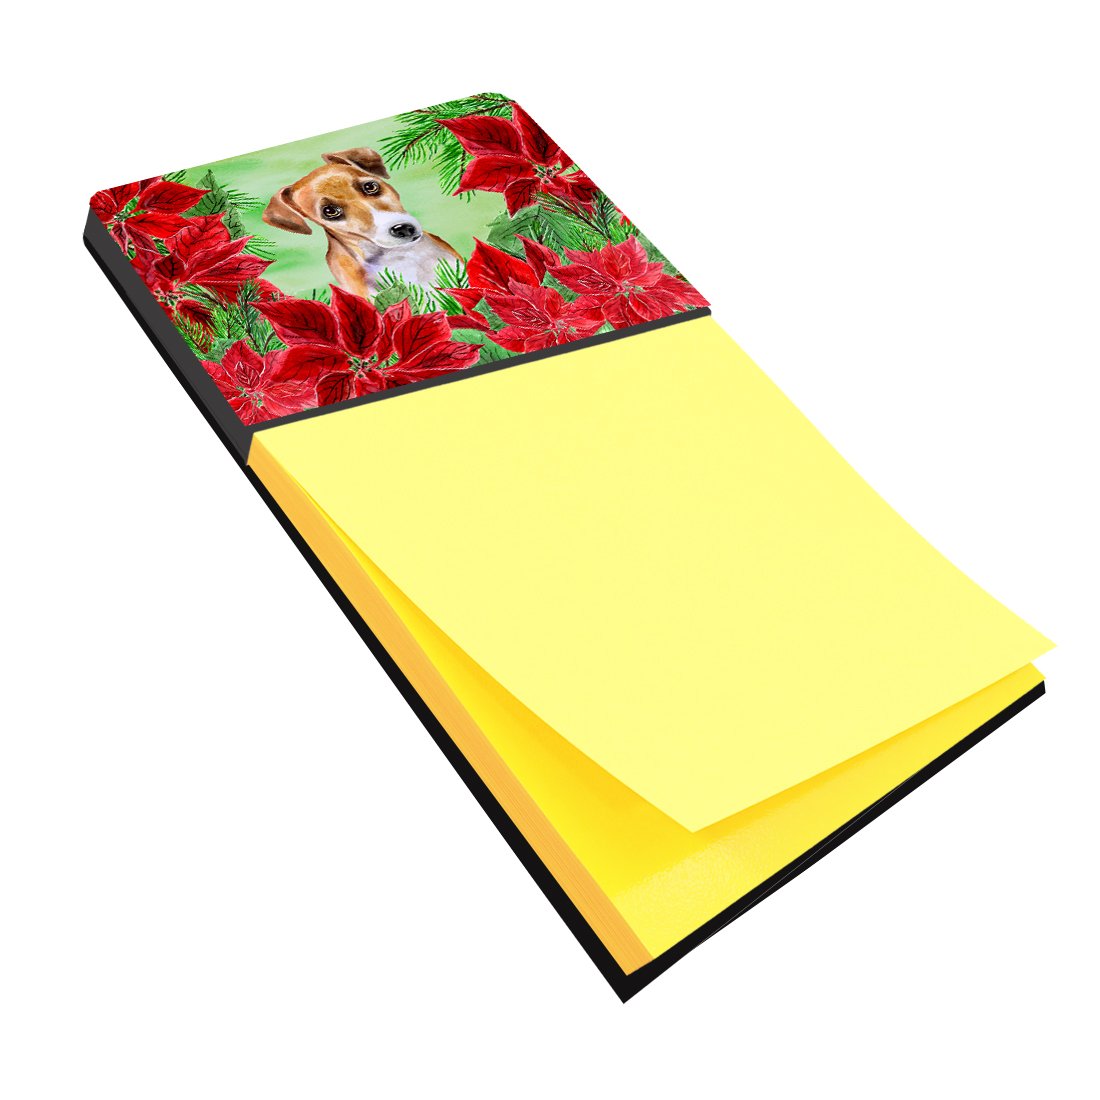 Jack Russell Terrier #2 Poinsettas Sticky Note Holder CK1360SN by Caroline's Treasures